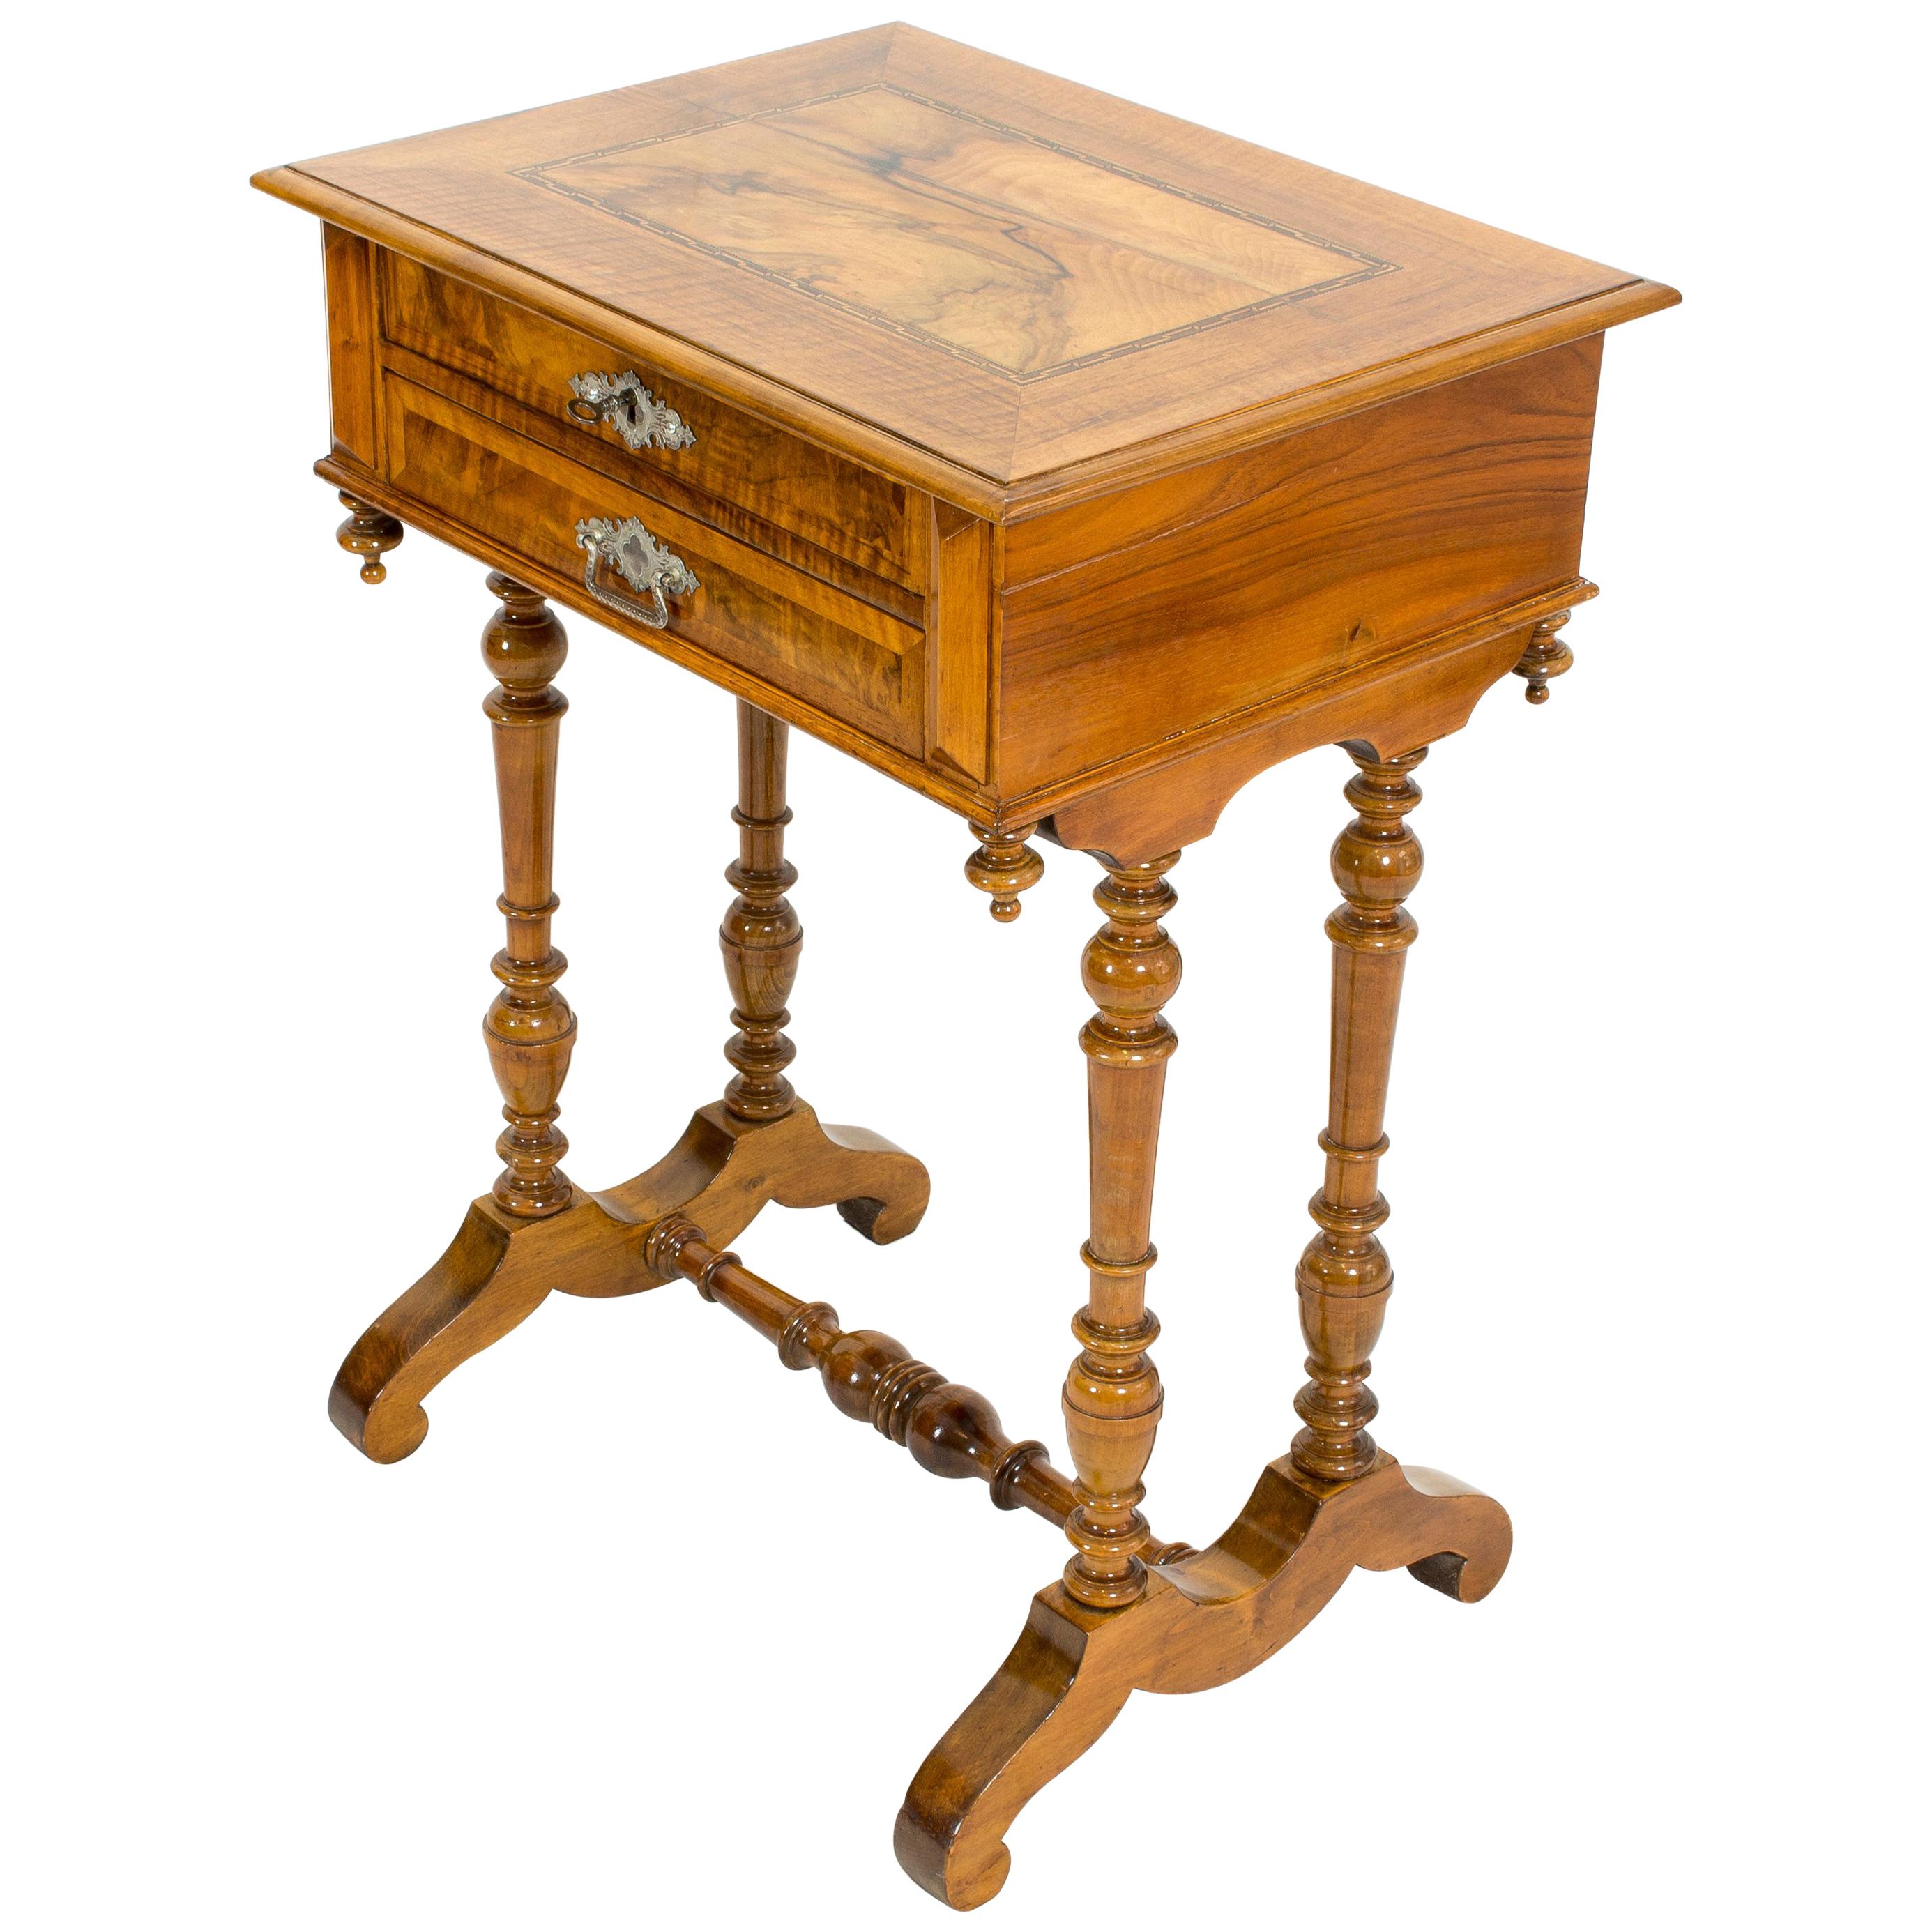 19th Century Sewing or Side Table Made of Walnut